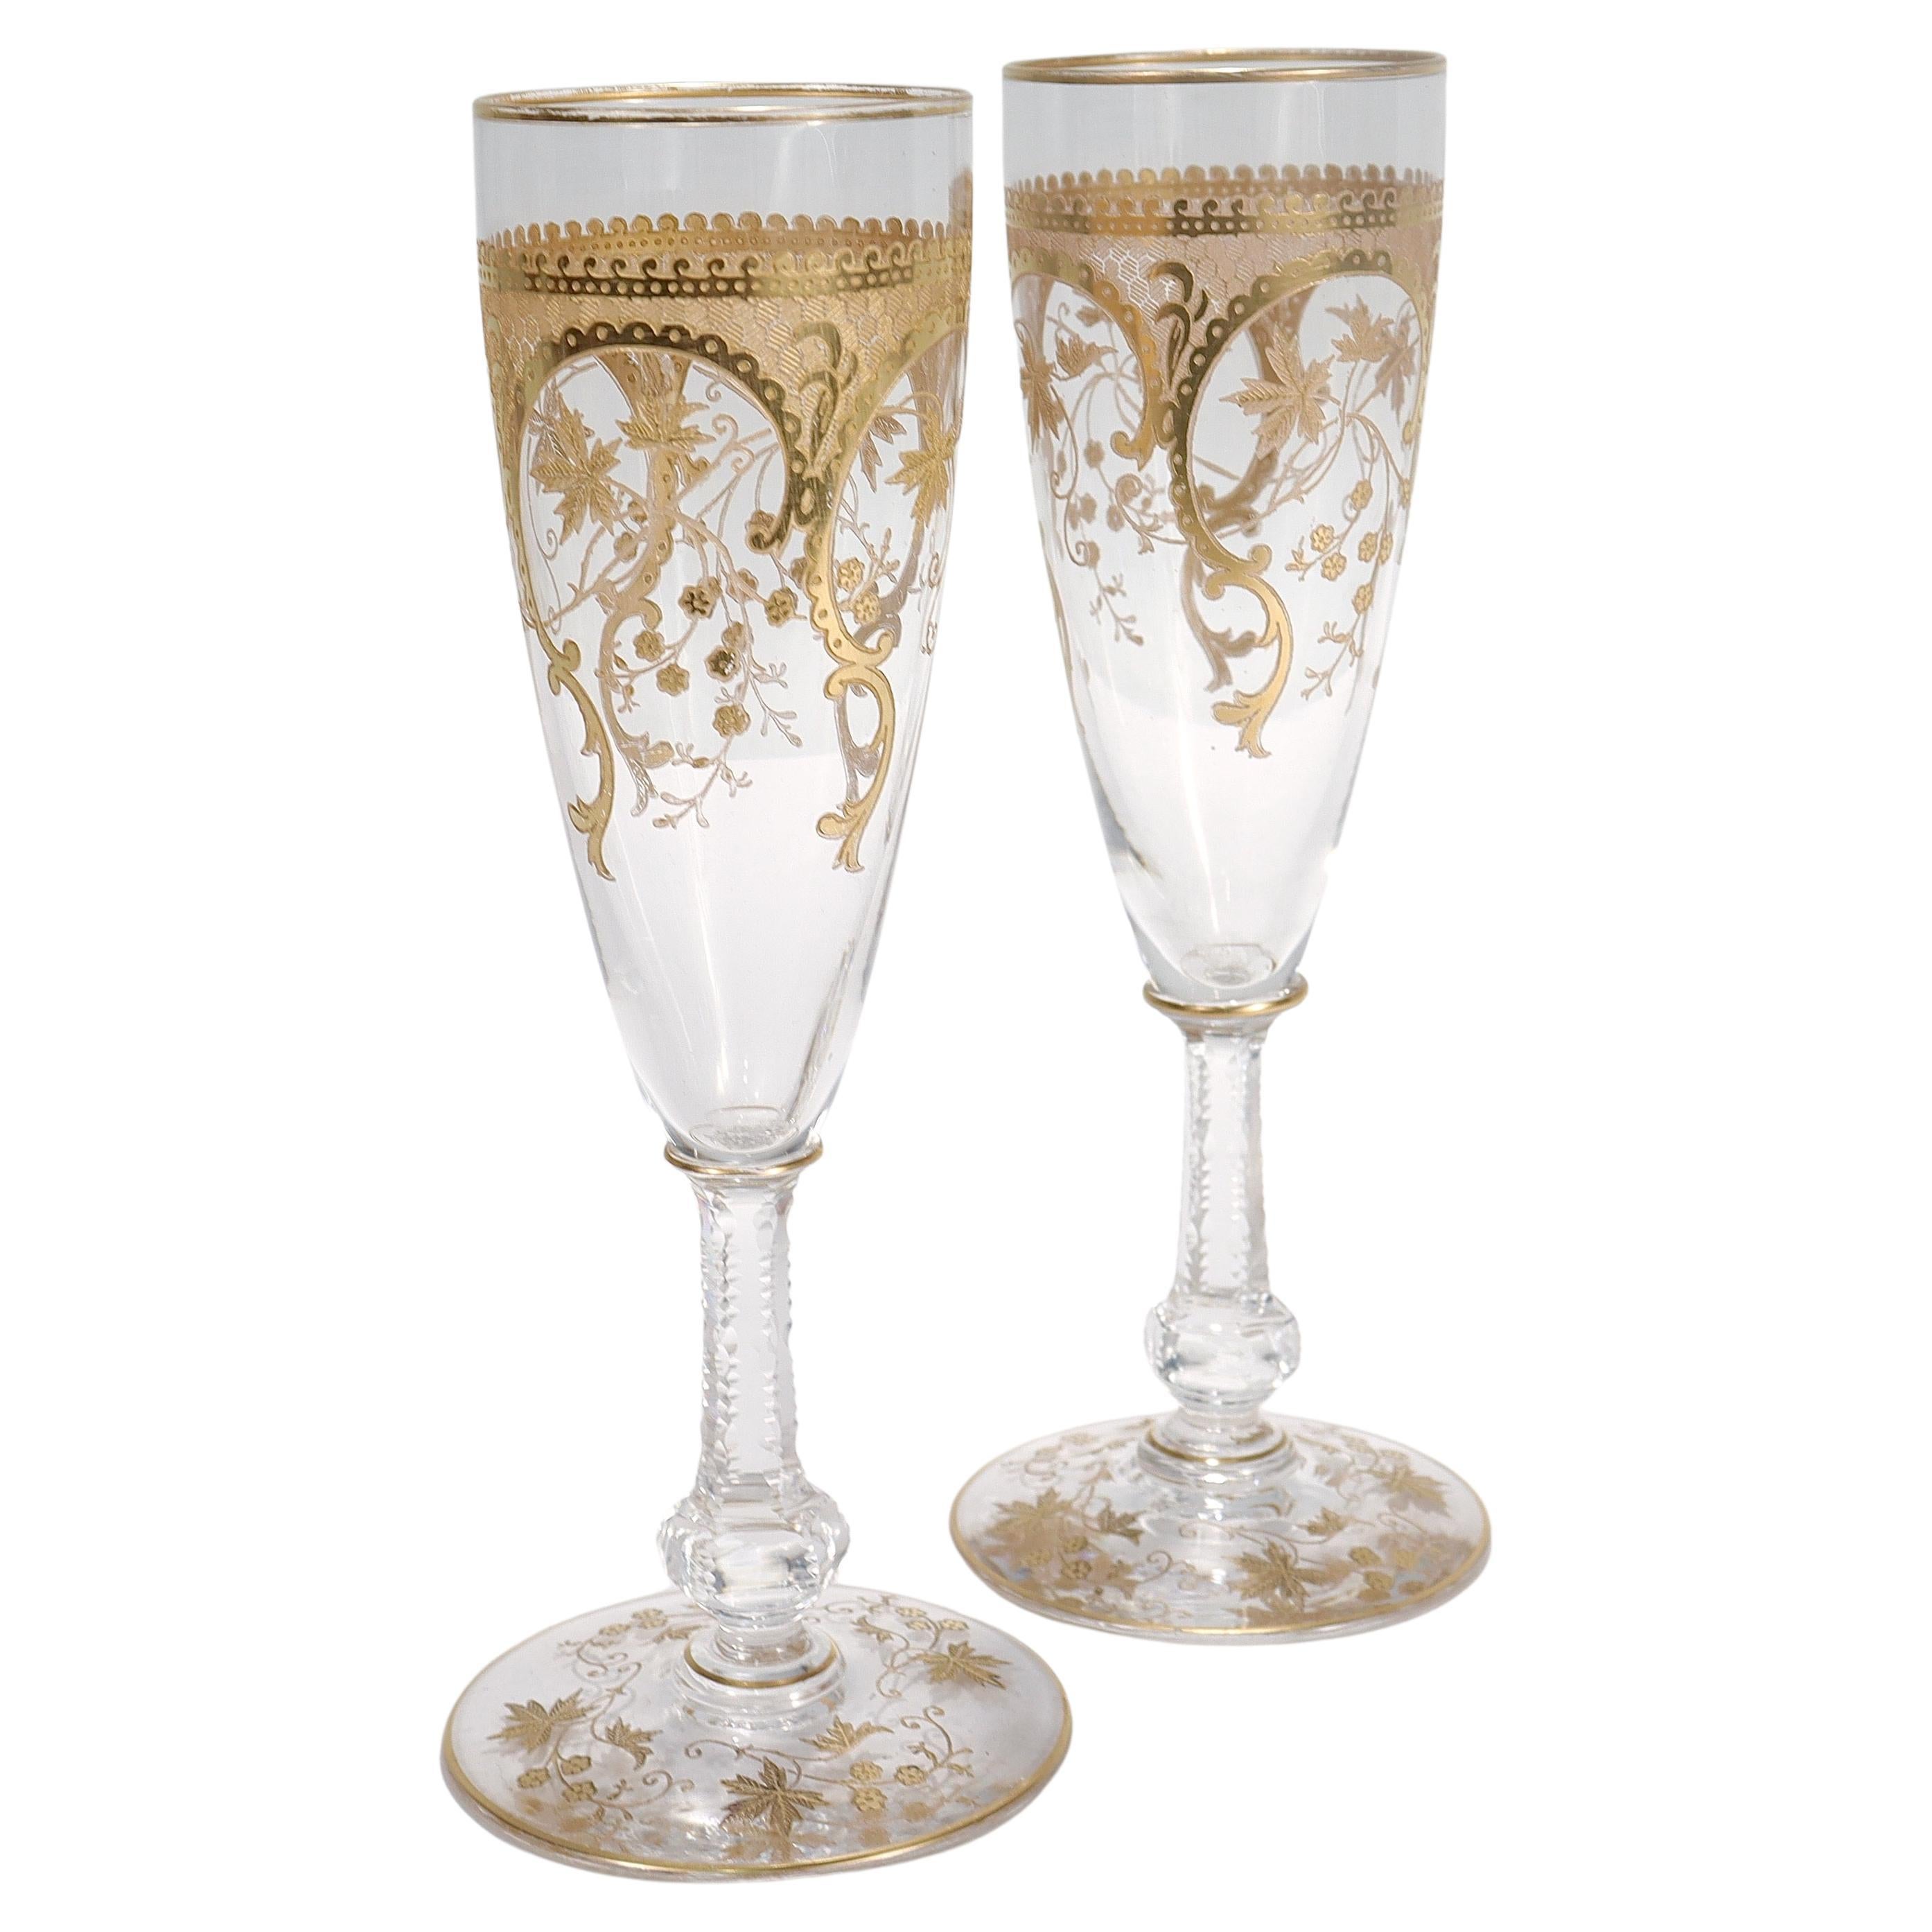 Pair of Richly Gilt Antique Etched & Cut Glass Champagne Stems or Flutes 